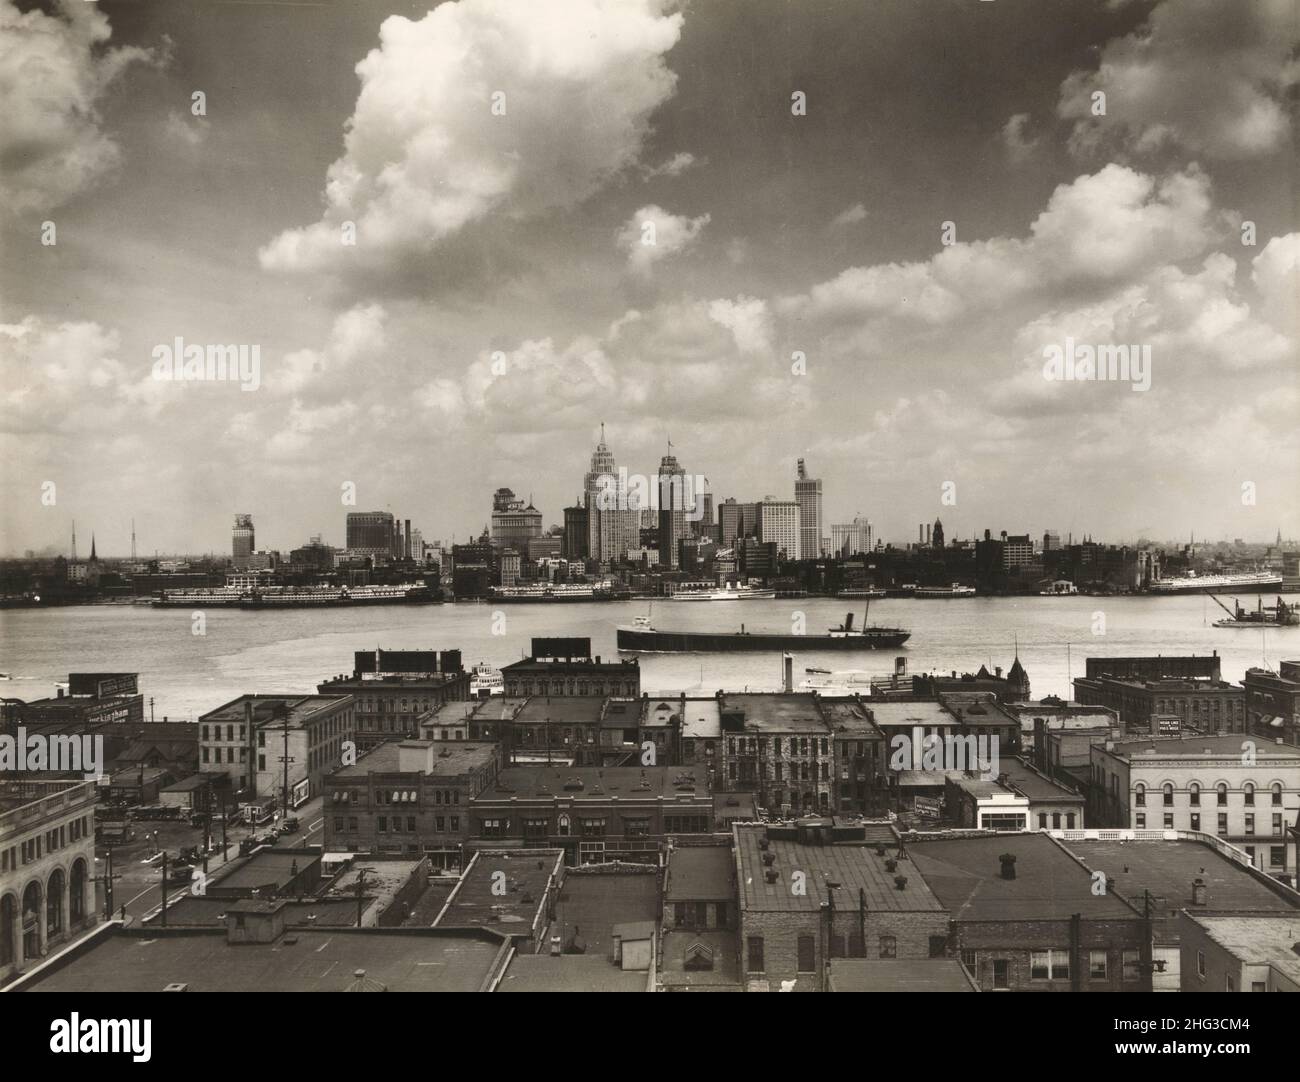 Vintage photo of Detroit skyline. Detroit skyline and boats on the Detroit River as seen from Windsor, Ontario(?). In foreground, rooftops of building Stock Photo